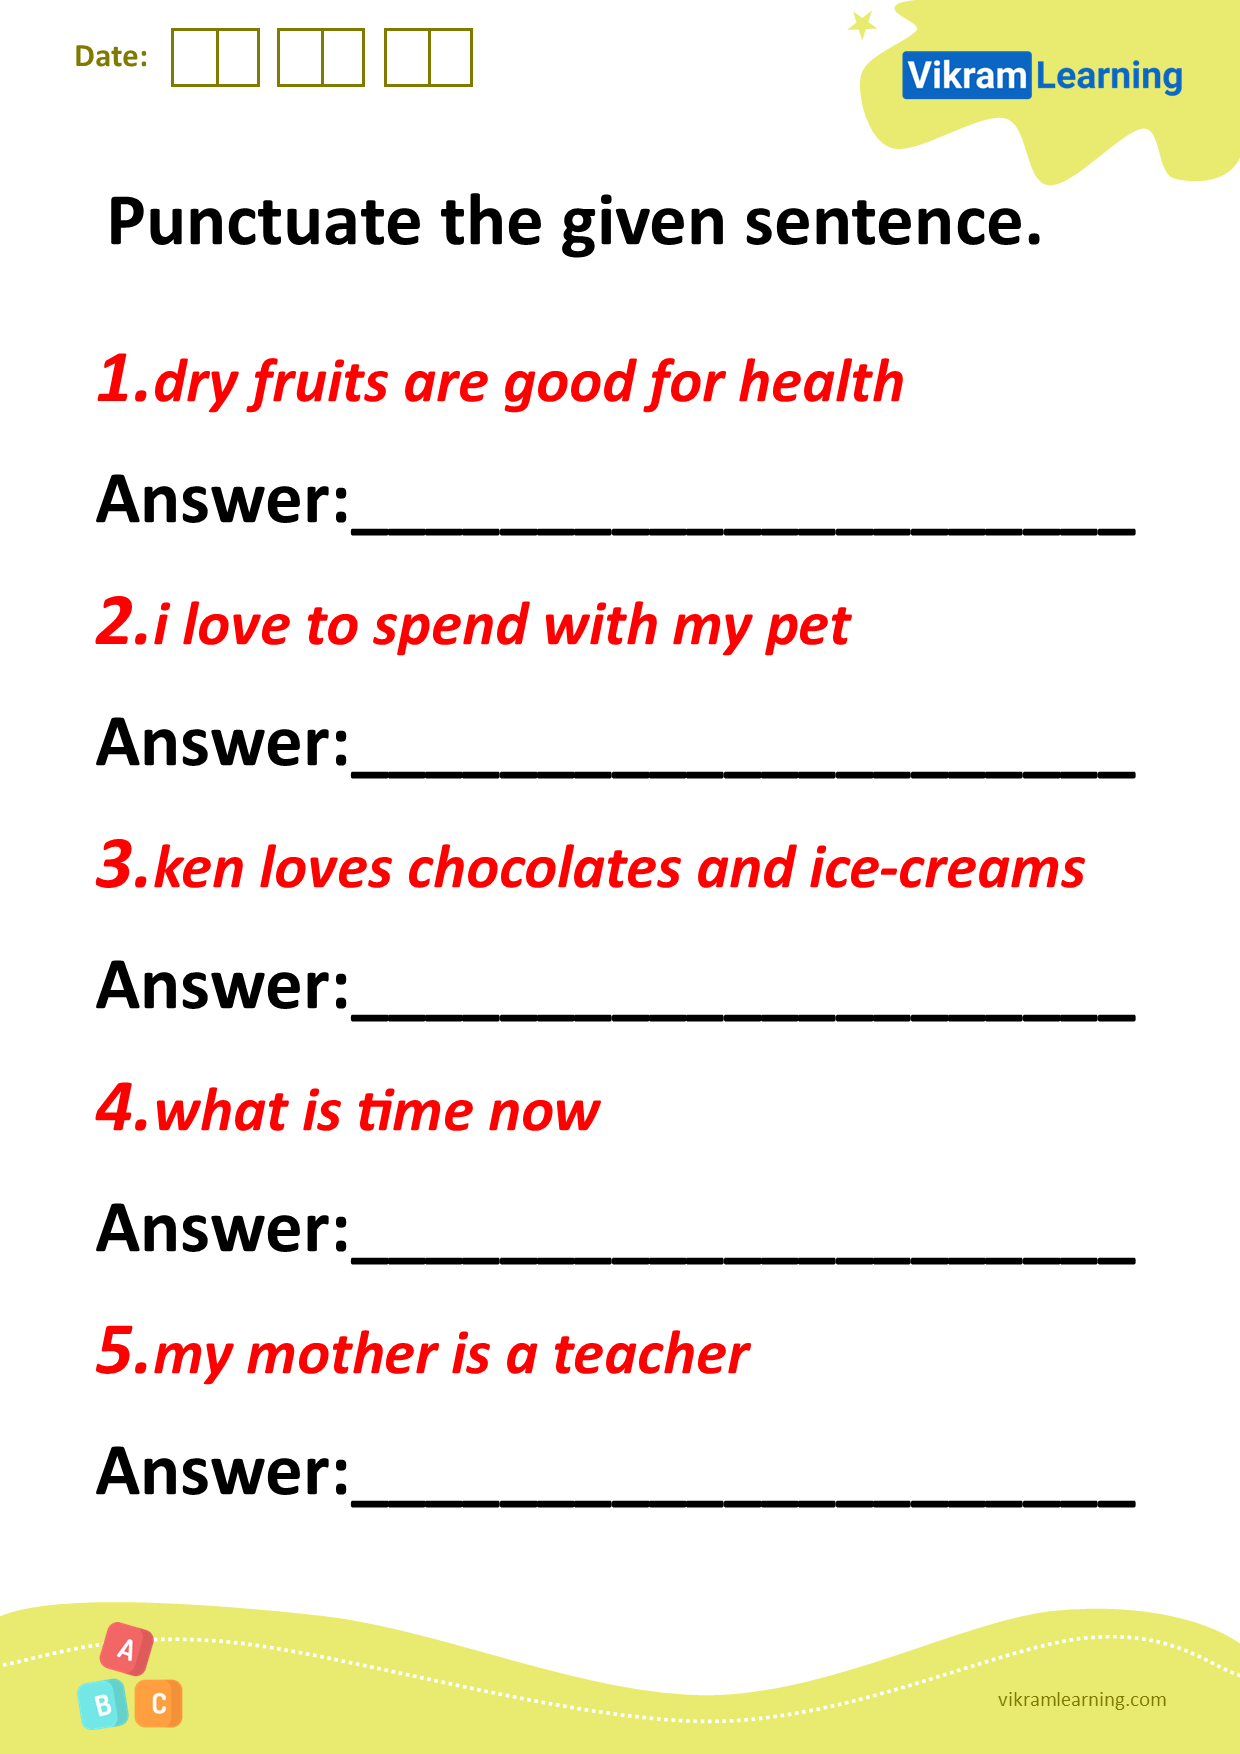 download-punctuate-the-given-sentence-worksheets-vikramlearning